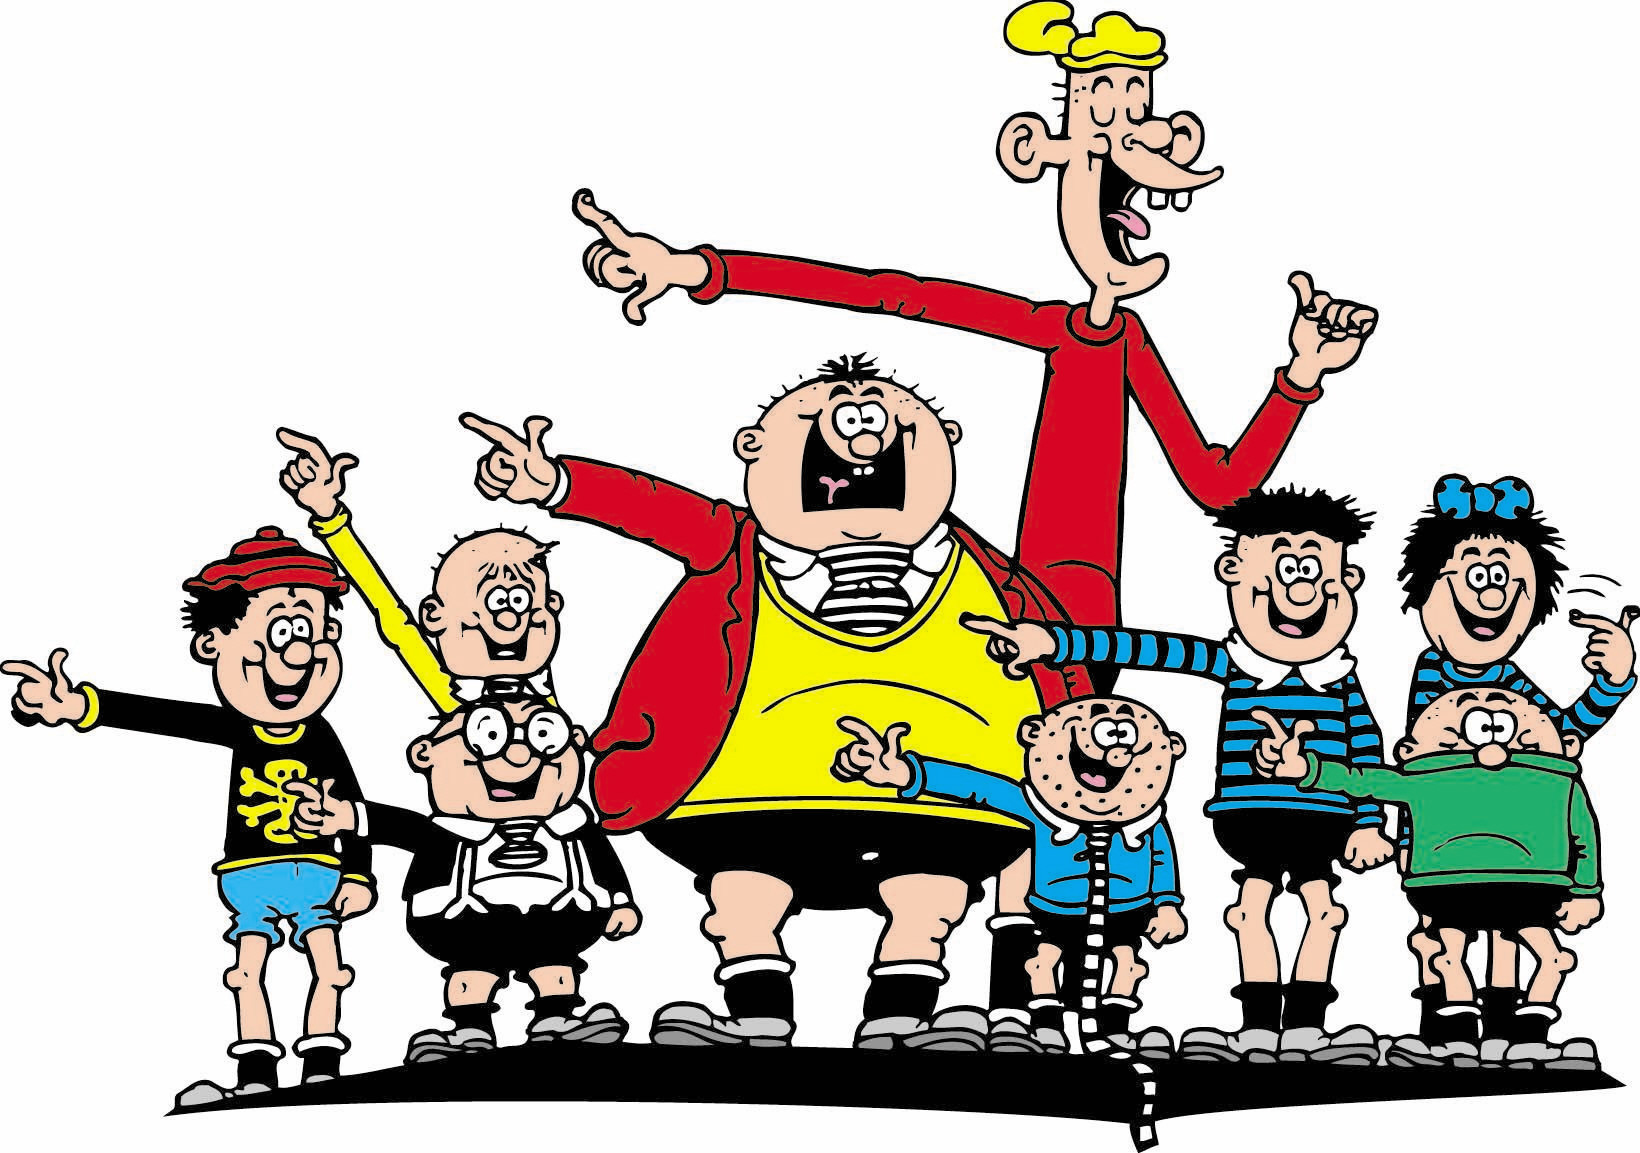 The Bash Street Kids are some of Leo Baxendale's most enduring creations.